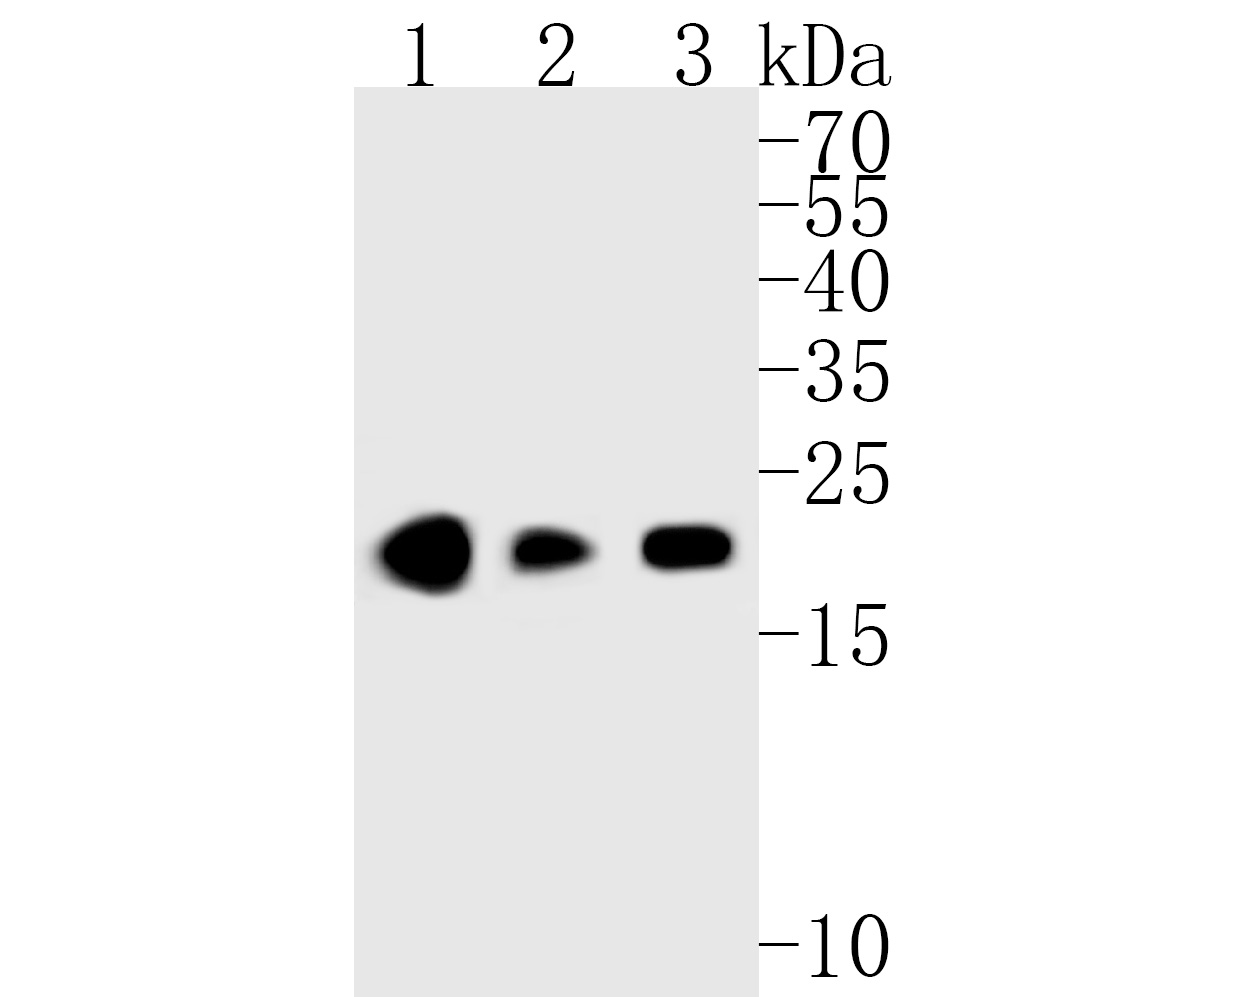 Western blot analysis of Ube2B on different lysates. Proteins were transferred to a PVDF membrane and blocked with 5% BSA in PBS for 1 hour at room temperature. The primary antibody (ET7111-09, 1/1,000) was used in 5% BSA at room temperature for 2 hours. Goat Anti-Rabbit IgG - HRP Secondary Antibody (HA1001) at 1:5,000 dilution was used for 1 hour at room temperature.<br />
Positive control: <br />
Lane 1: A431 cell lysate<br />
Lane 2: THP-1 cell lysate<br />
Lane 3: HepG2 cell lysate